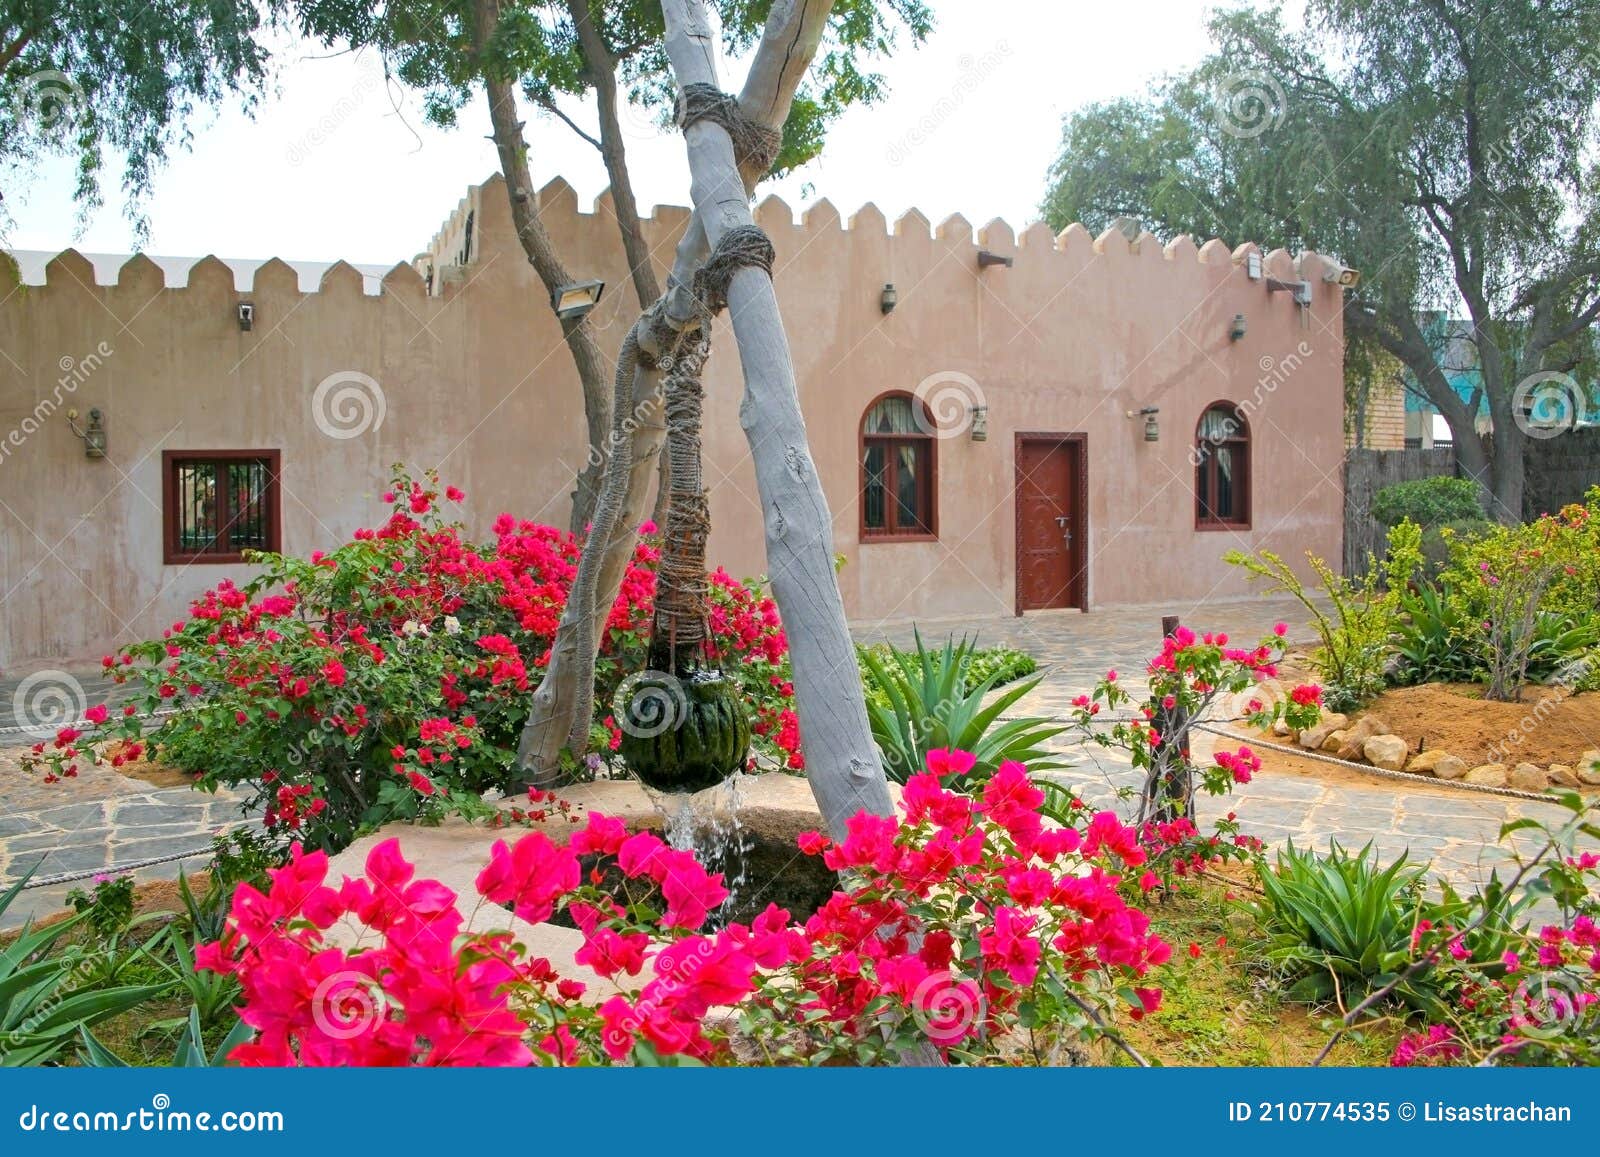 Traditional Stone House And Well In The Front Garden At The Heritage Village Abu Dhabi United Arab Emirates Stock Image - Image Of Architecture Beautiful 210774535